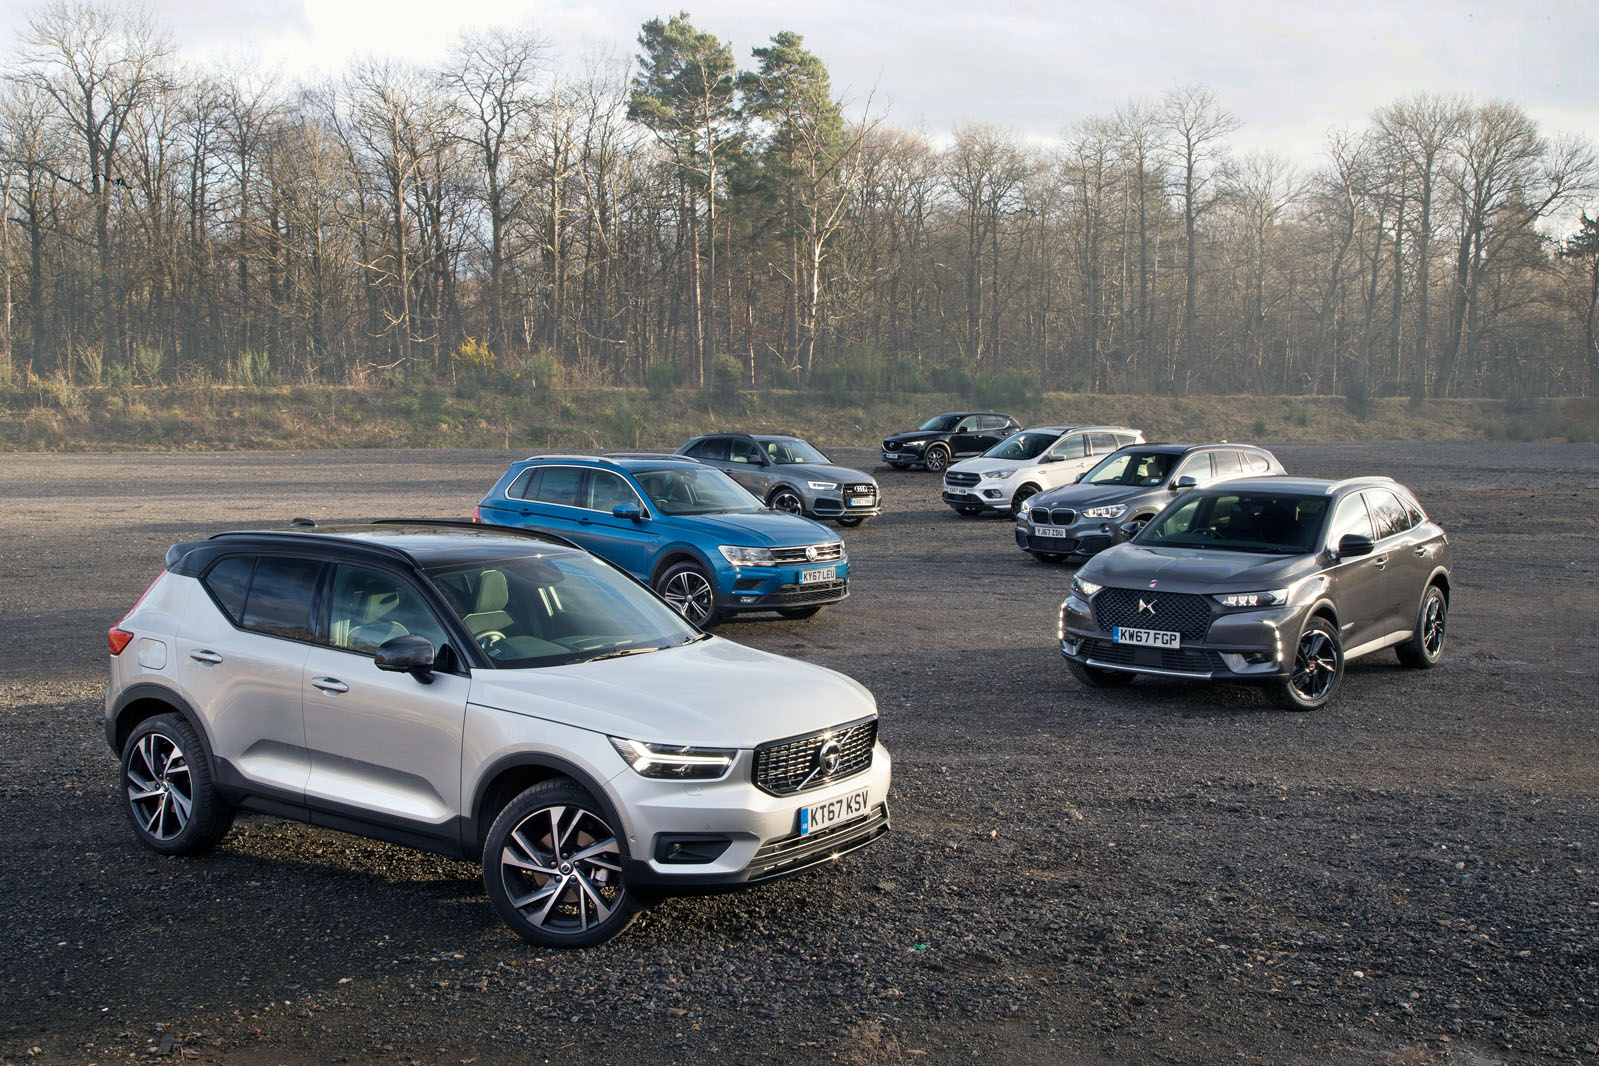 Volvo XC40 Vs. BMW X1: Which One Is The Better Luxury SUV?